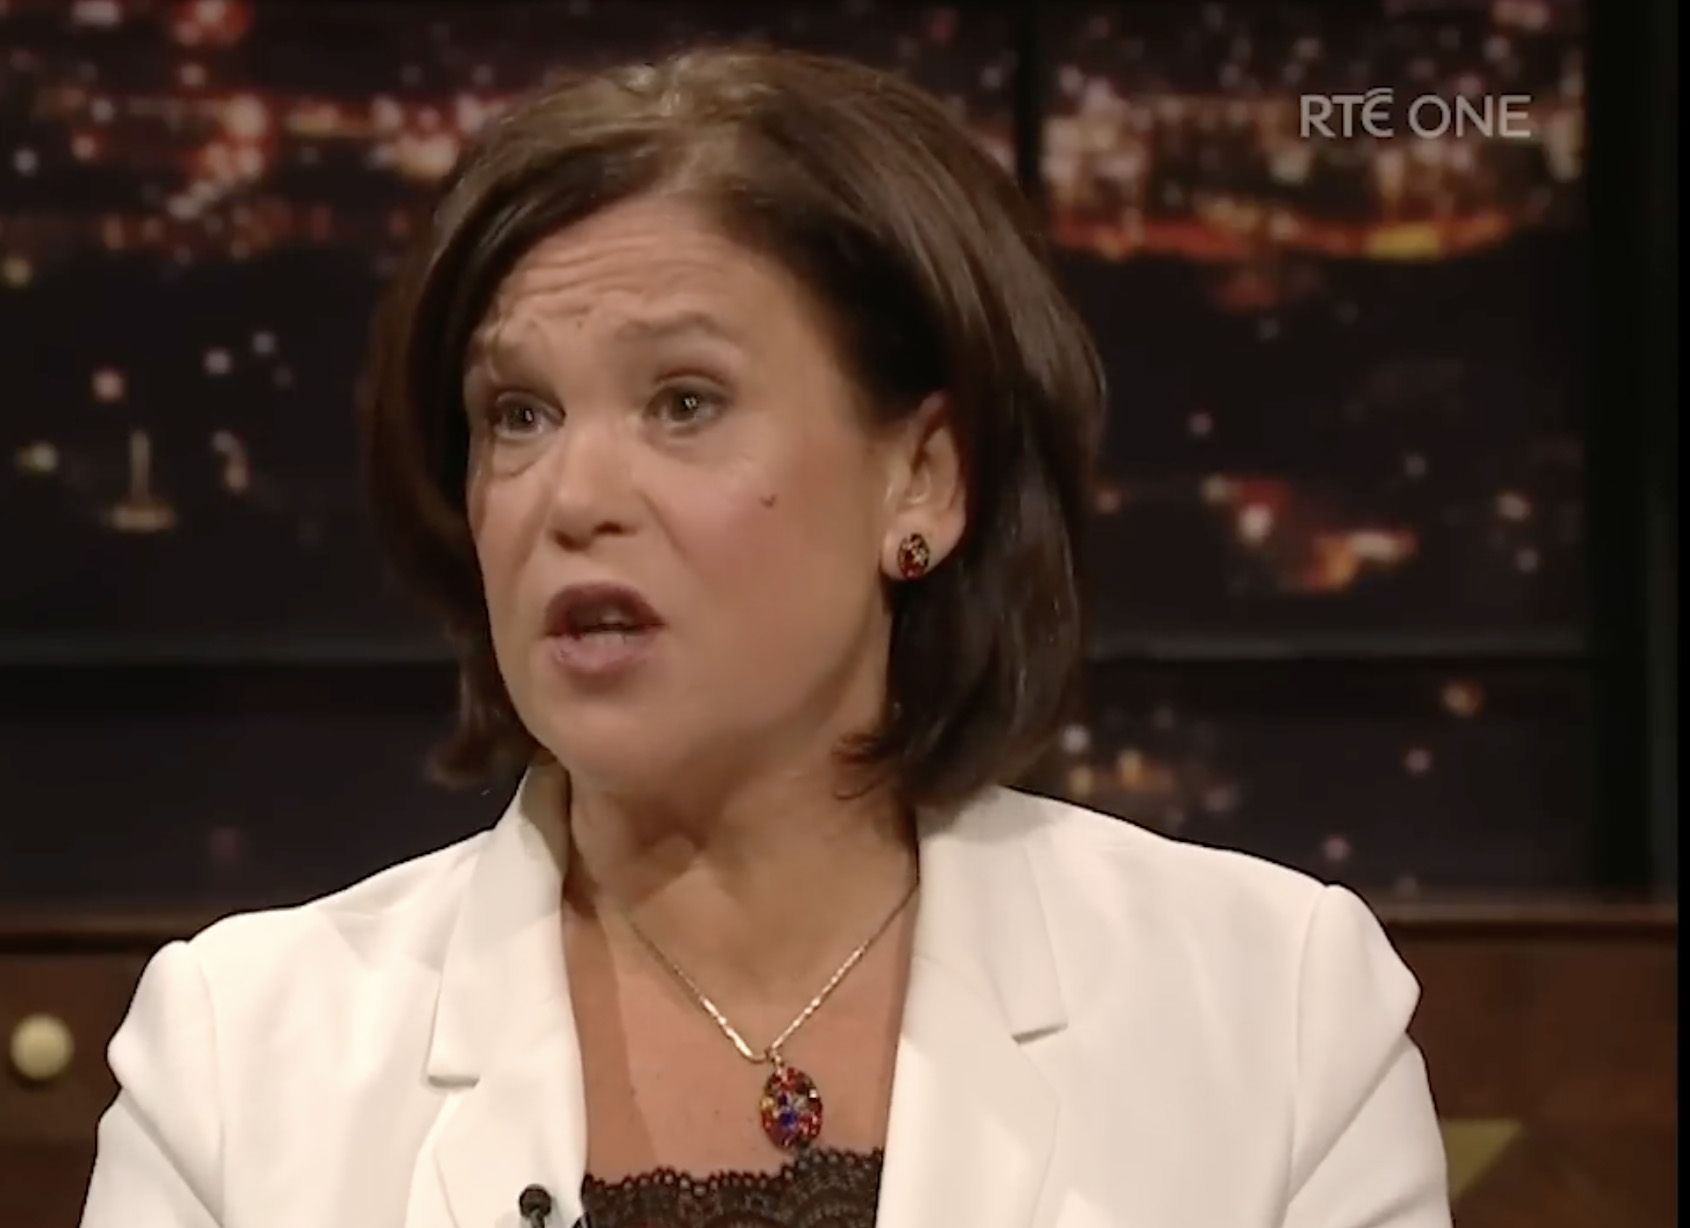 LATE LATE: Mary Lou McDonald’s interview with Ryan Tubridy was well received by the RTÉ audience